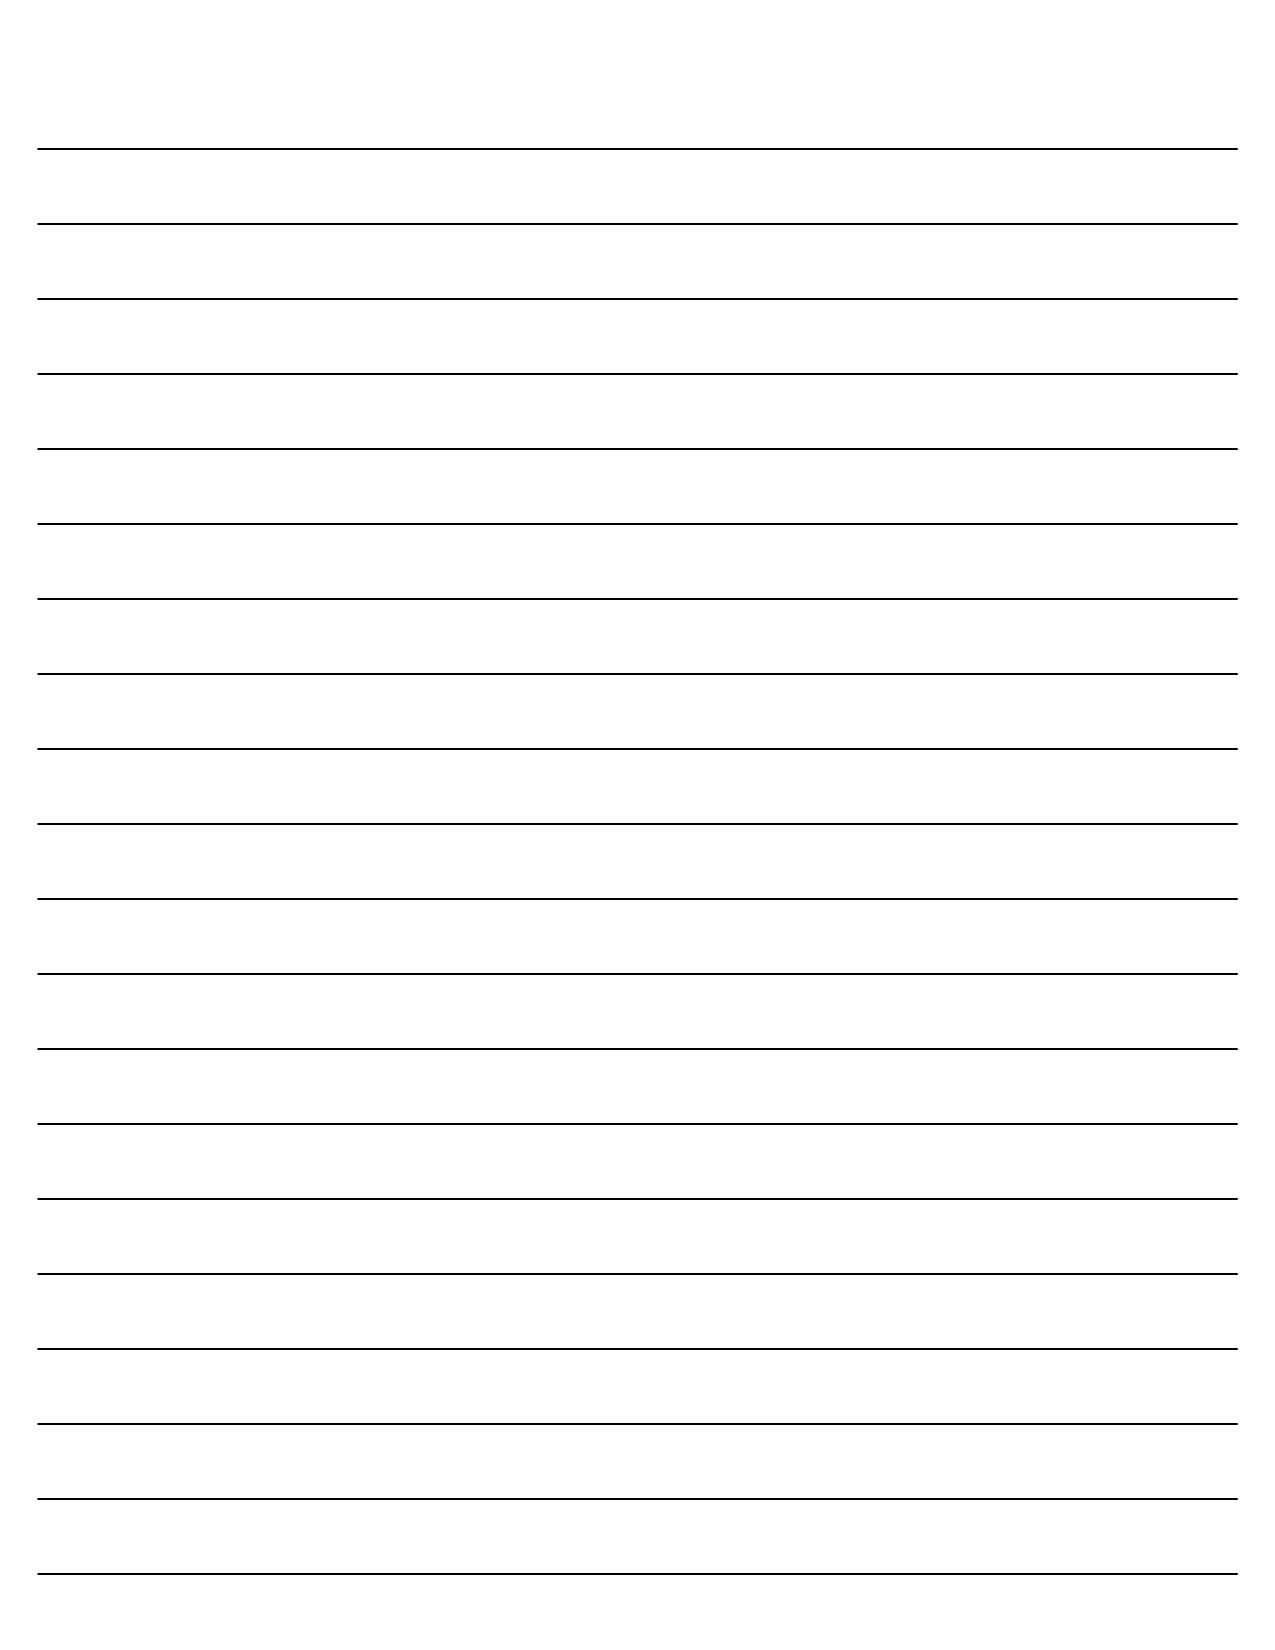 Blank Lined Paper Printable Free - Discover the Beauty of Printable Paper